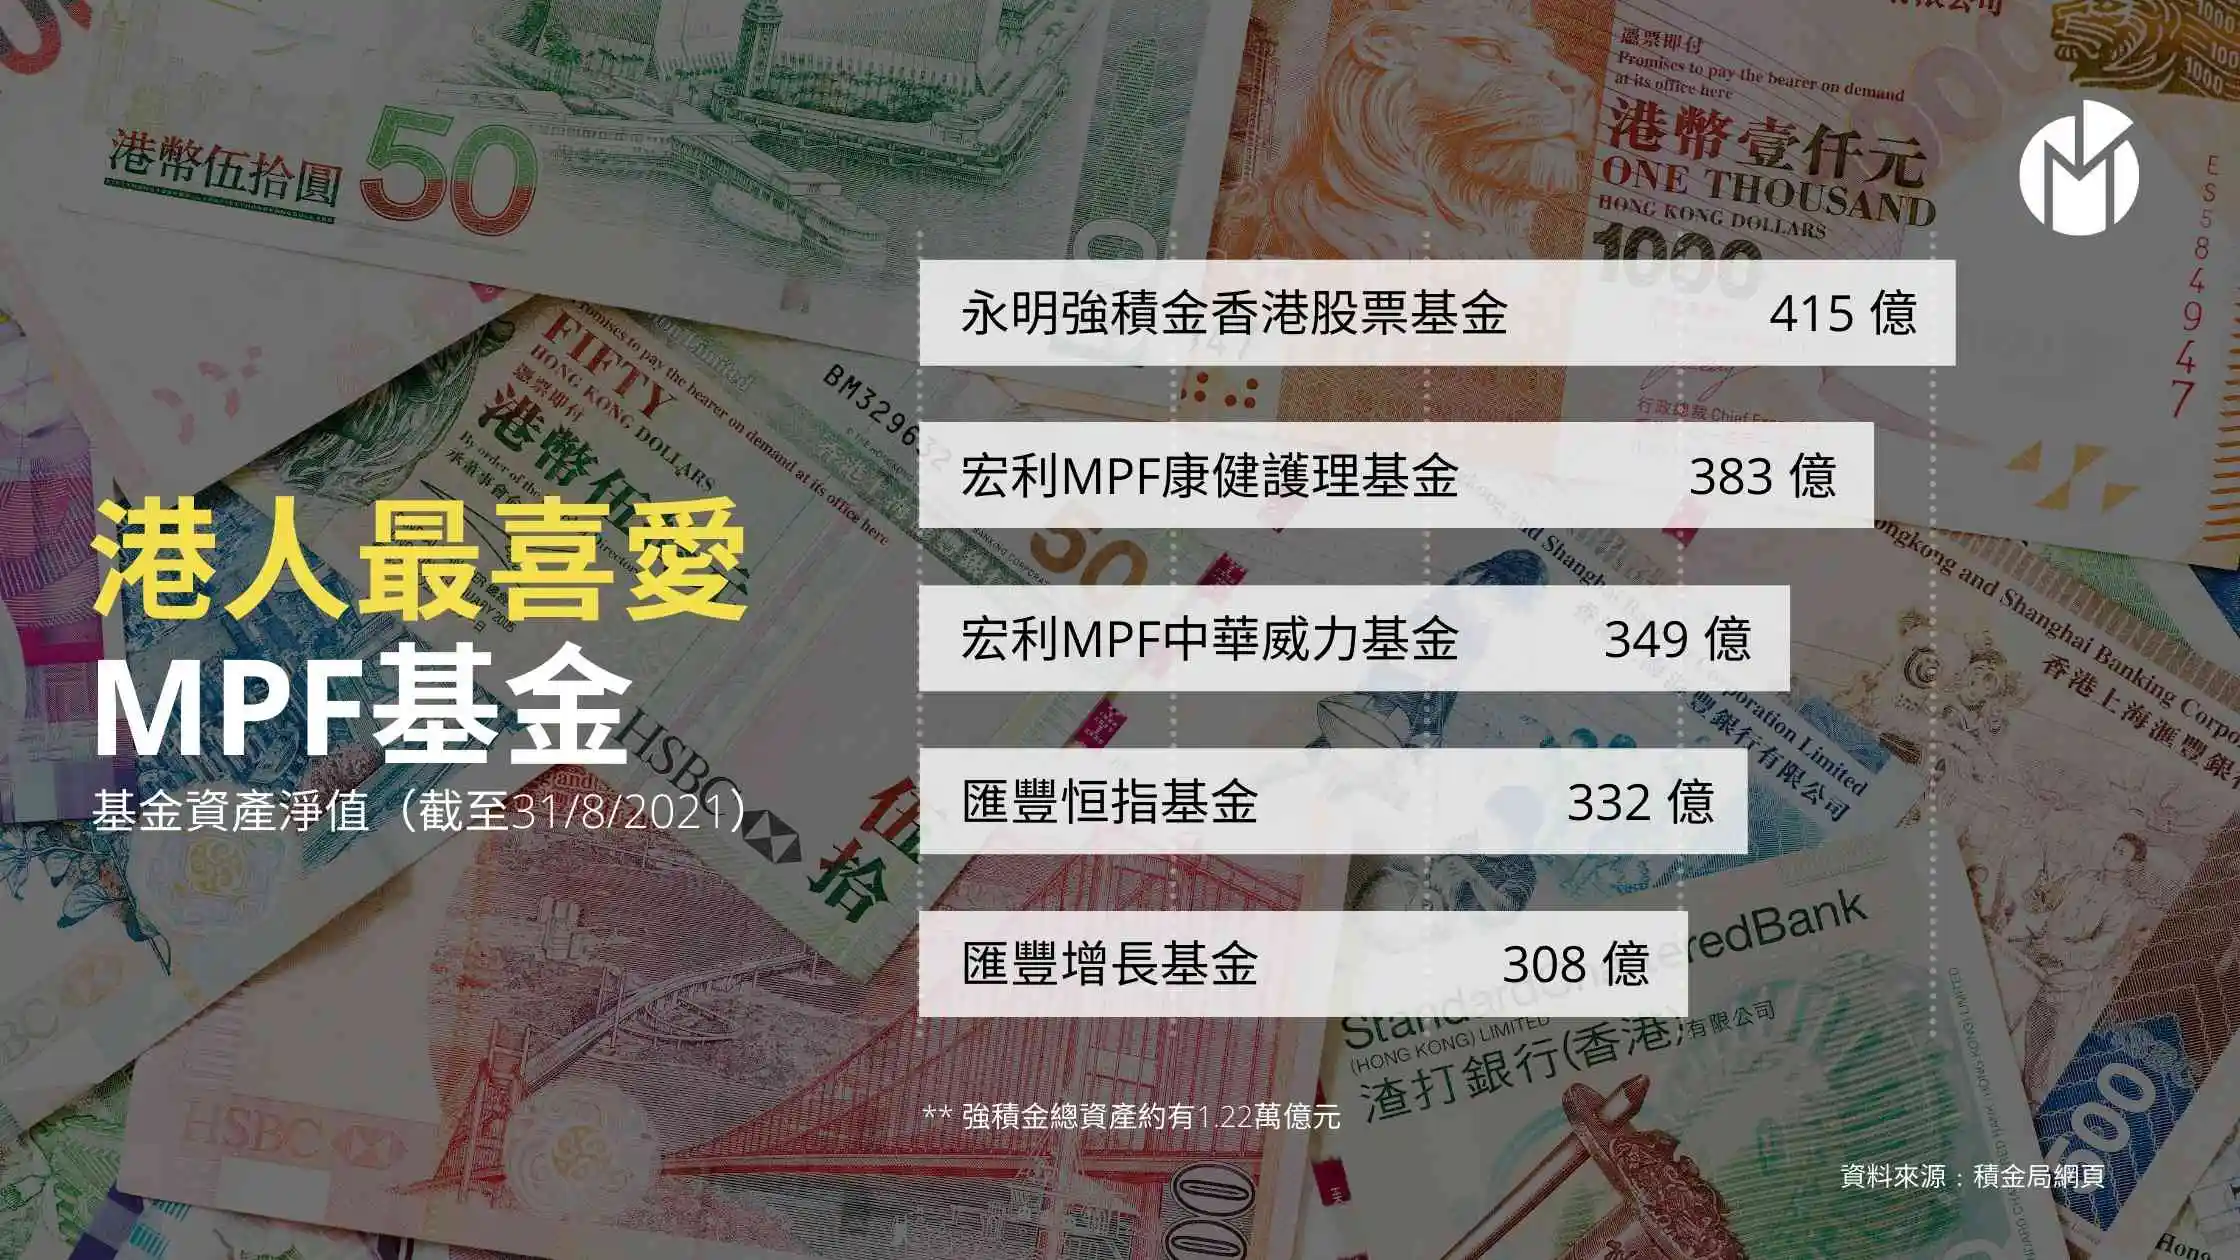 The fund size of the top 5 Most Liked MPF in Hong Kong